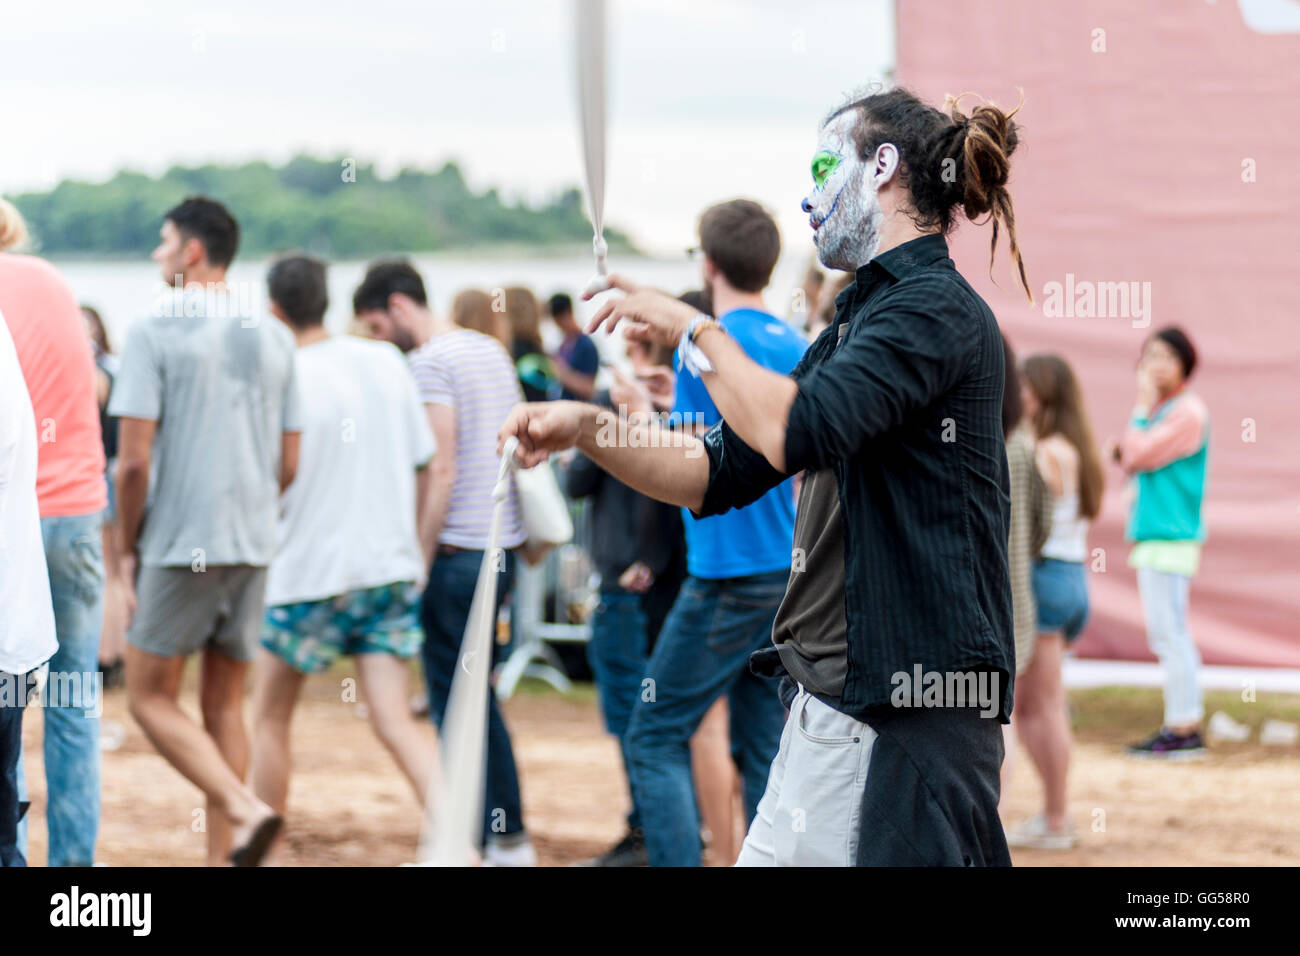 A young man with painted face and closed eyes is dancing on a music festival in a seaside town of Rovinj in Croatia. Stock Photo